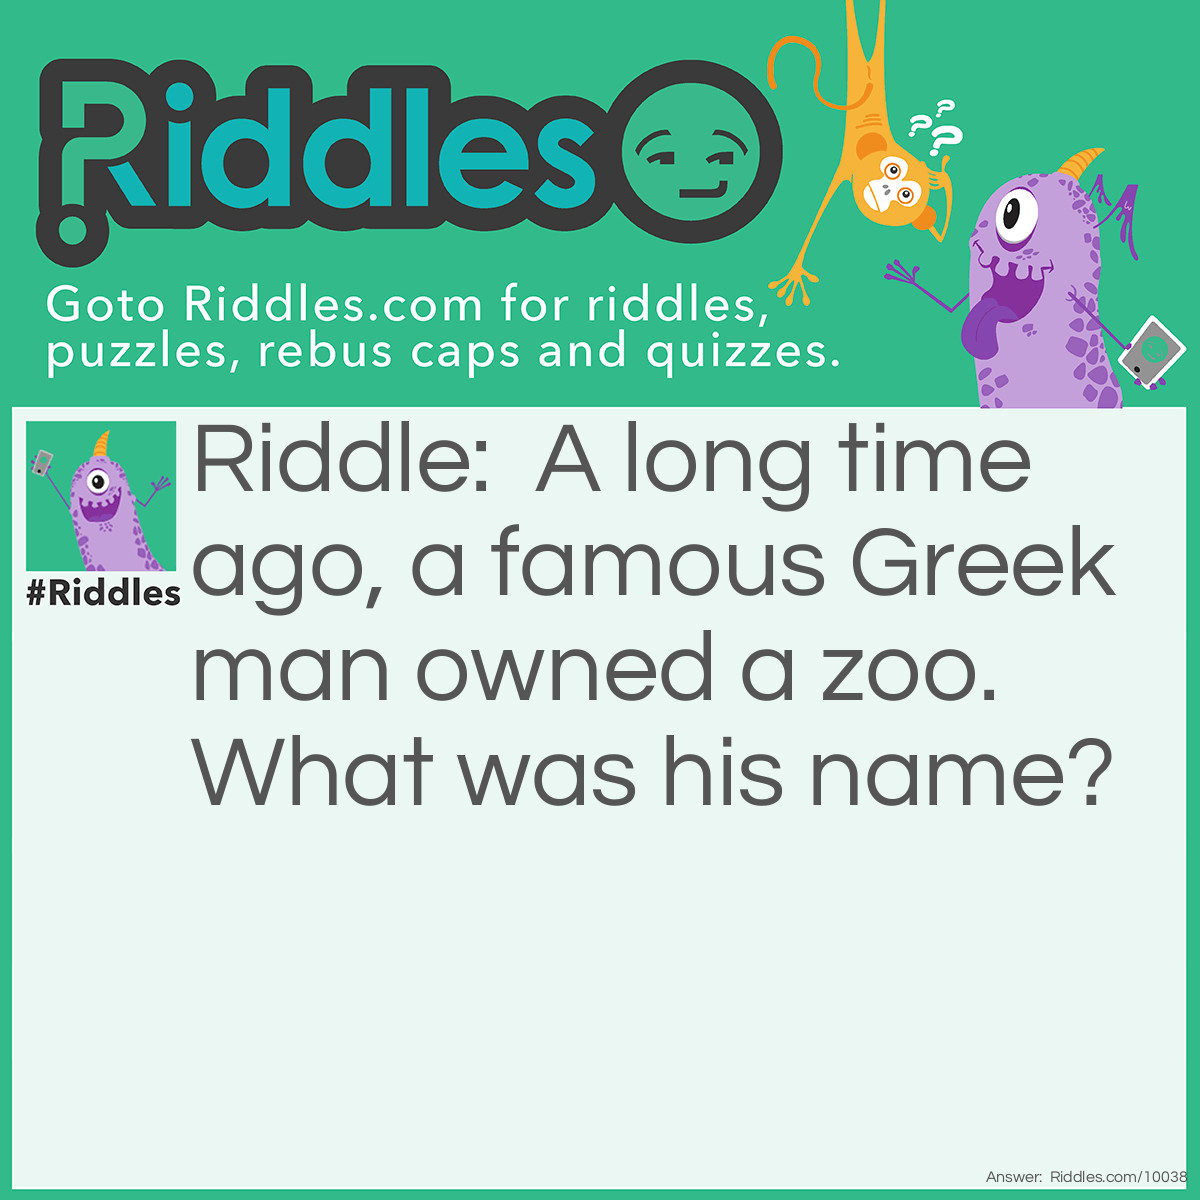 Riddle: A long time ago, a famous Greek man owned a zoo. What was his name? Answer: Hippocrates.